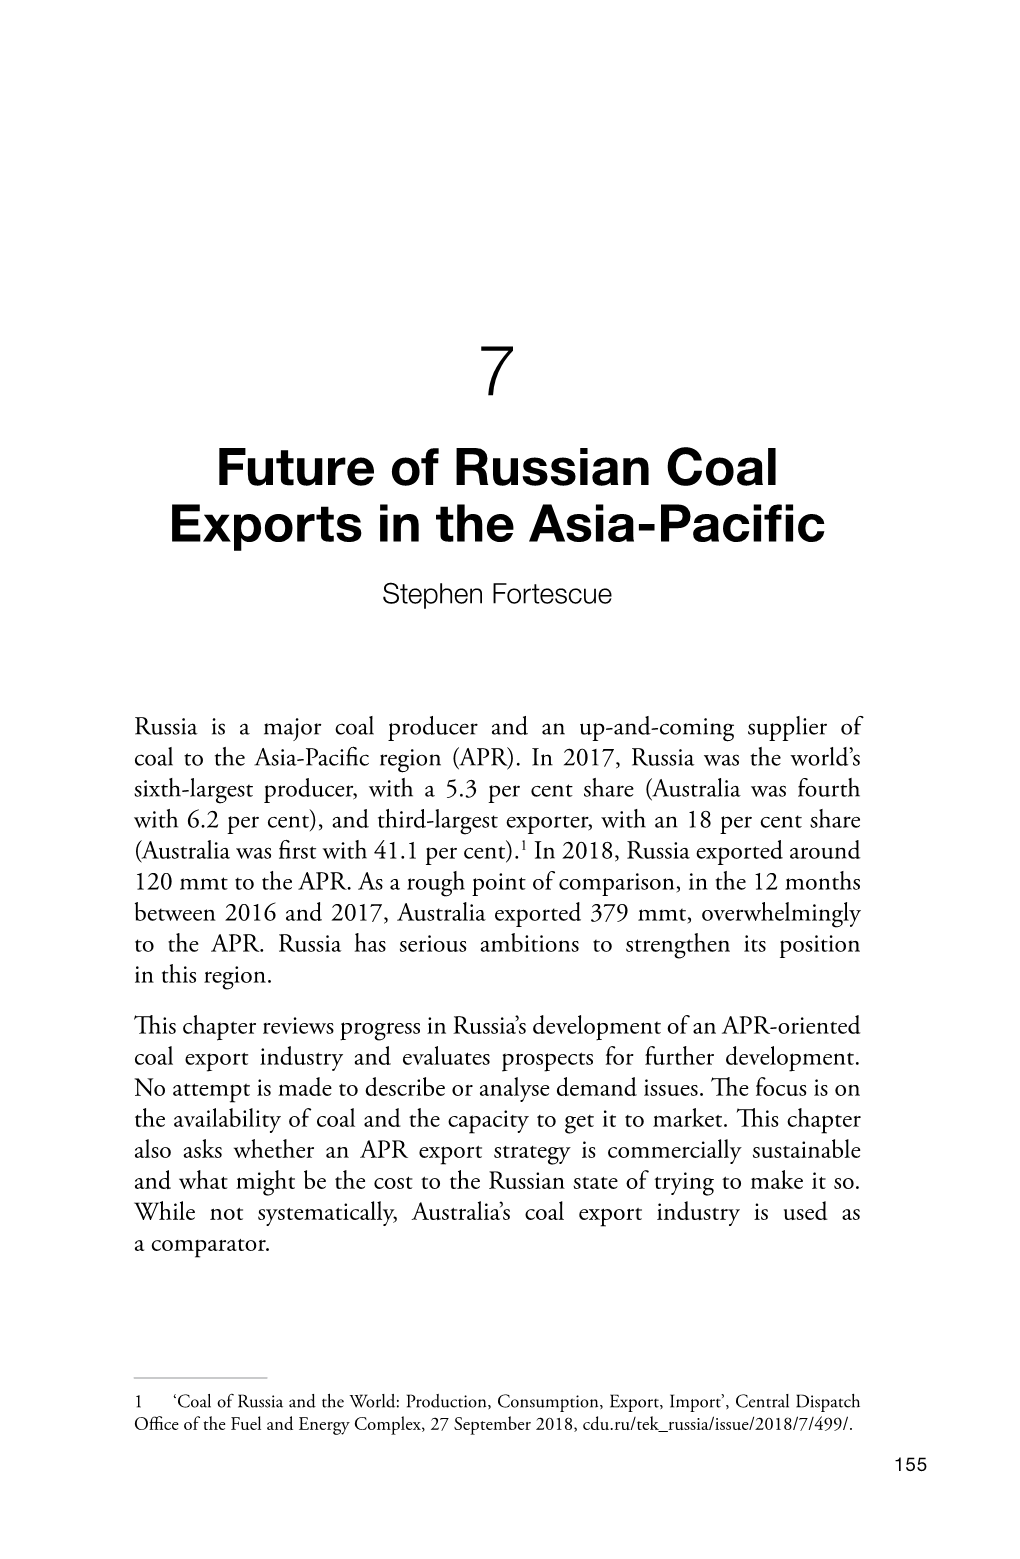 7. Future of Russian Coal Exports in the Asia-Pacific